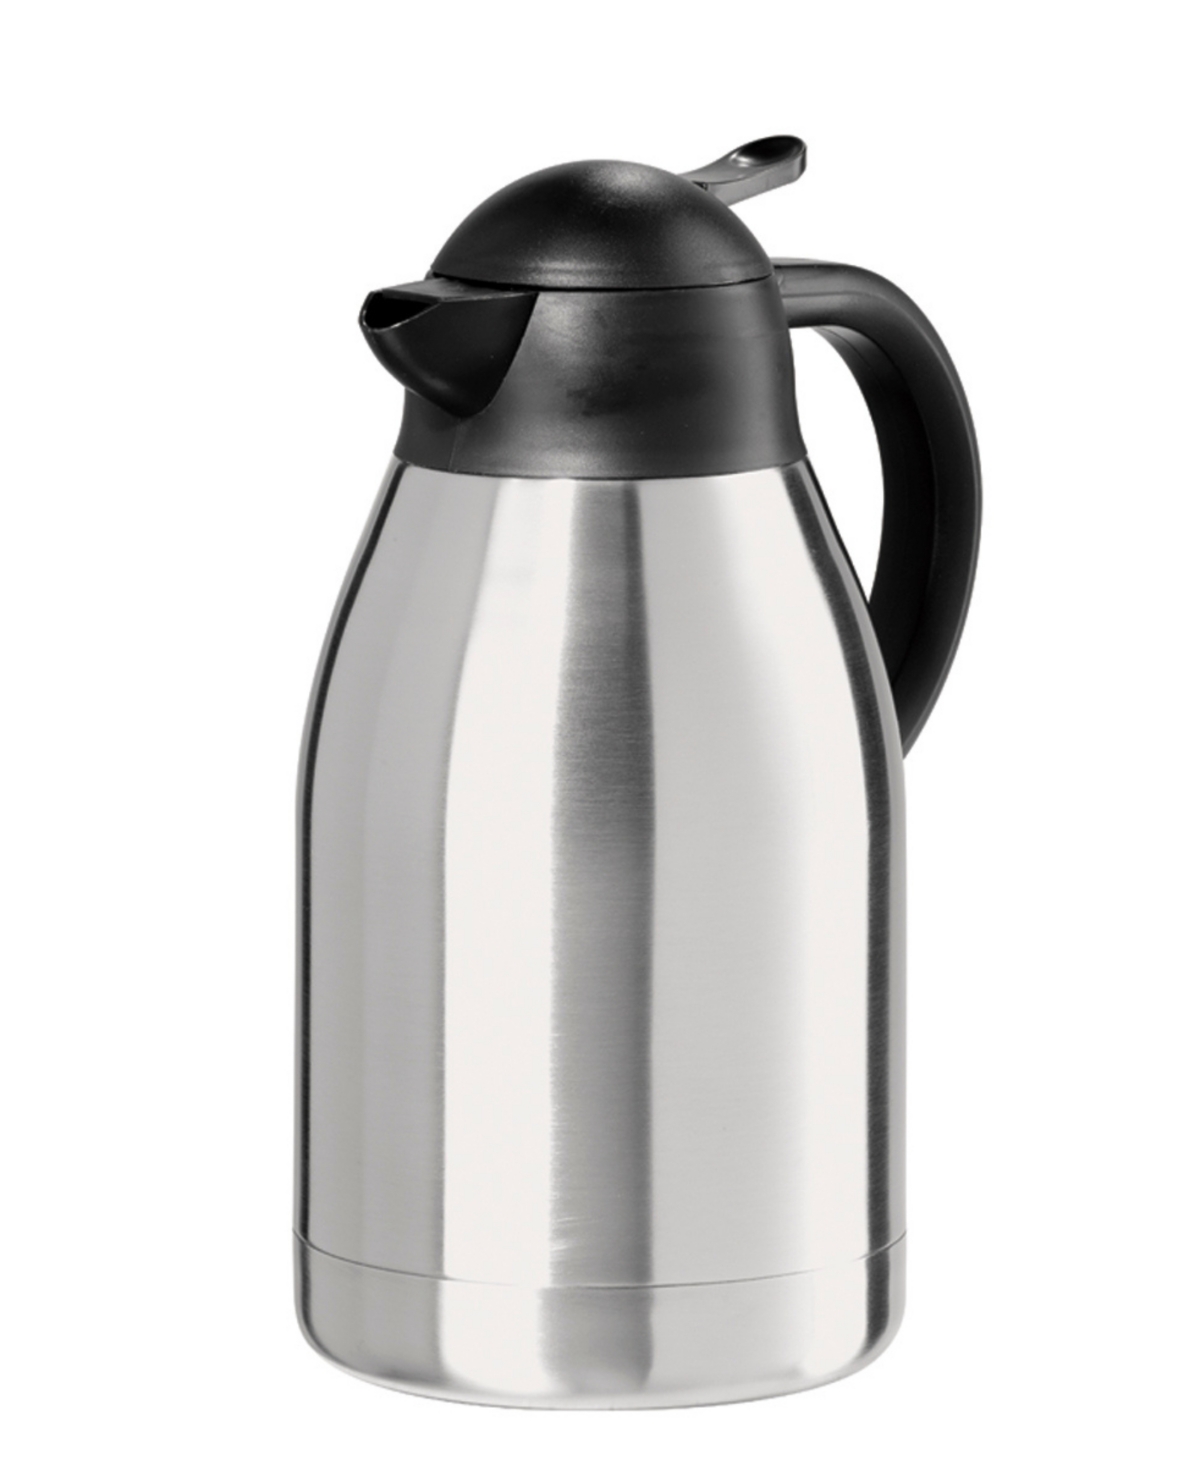 Oggi 2 Litre Catalina Carafe In Stainless Steel